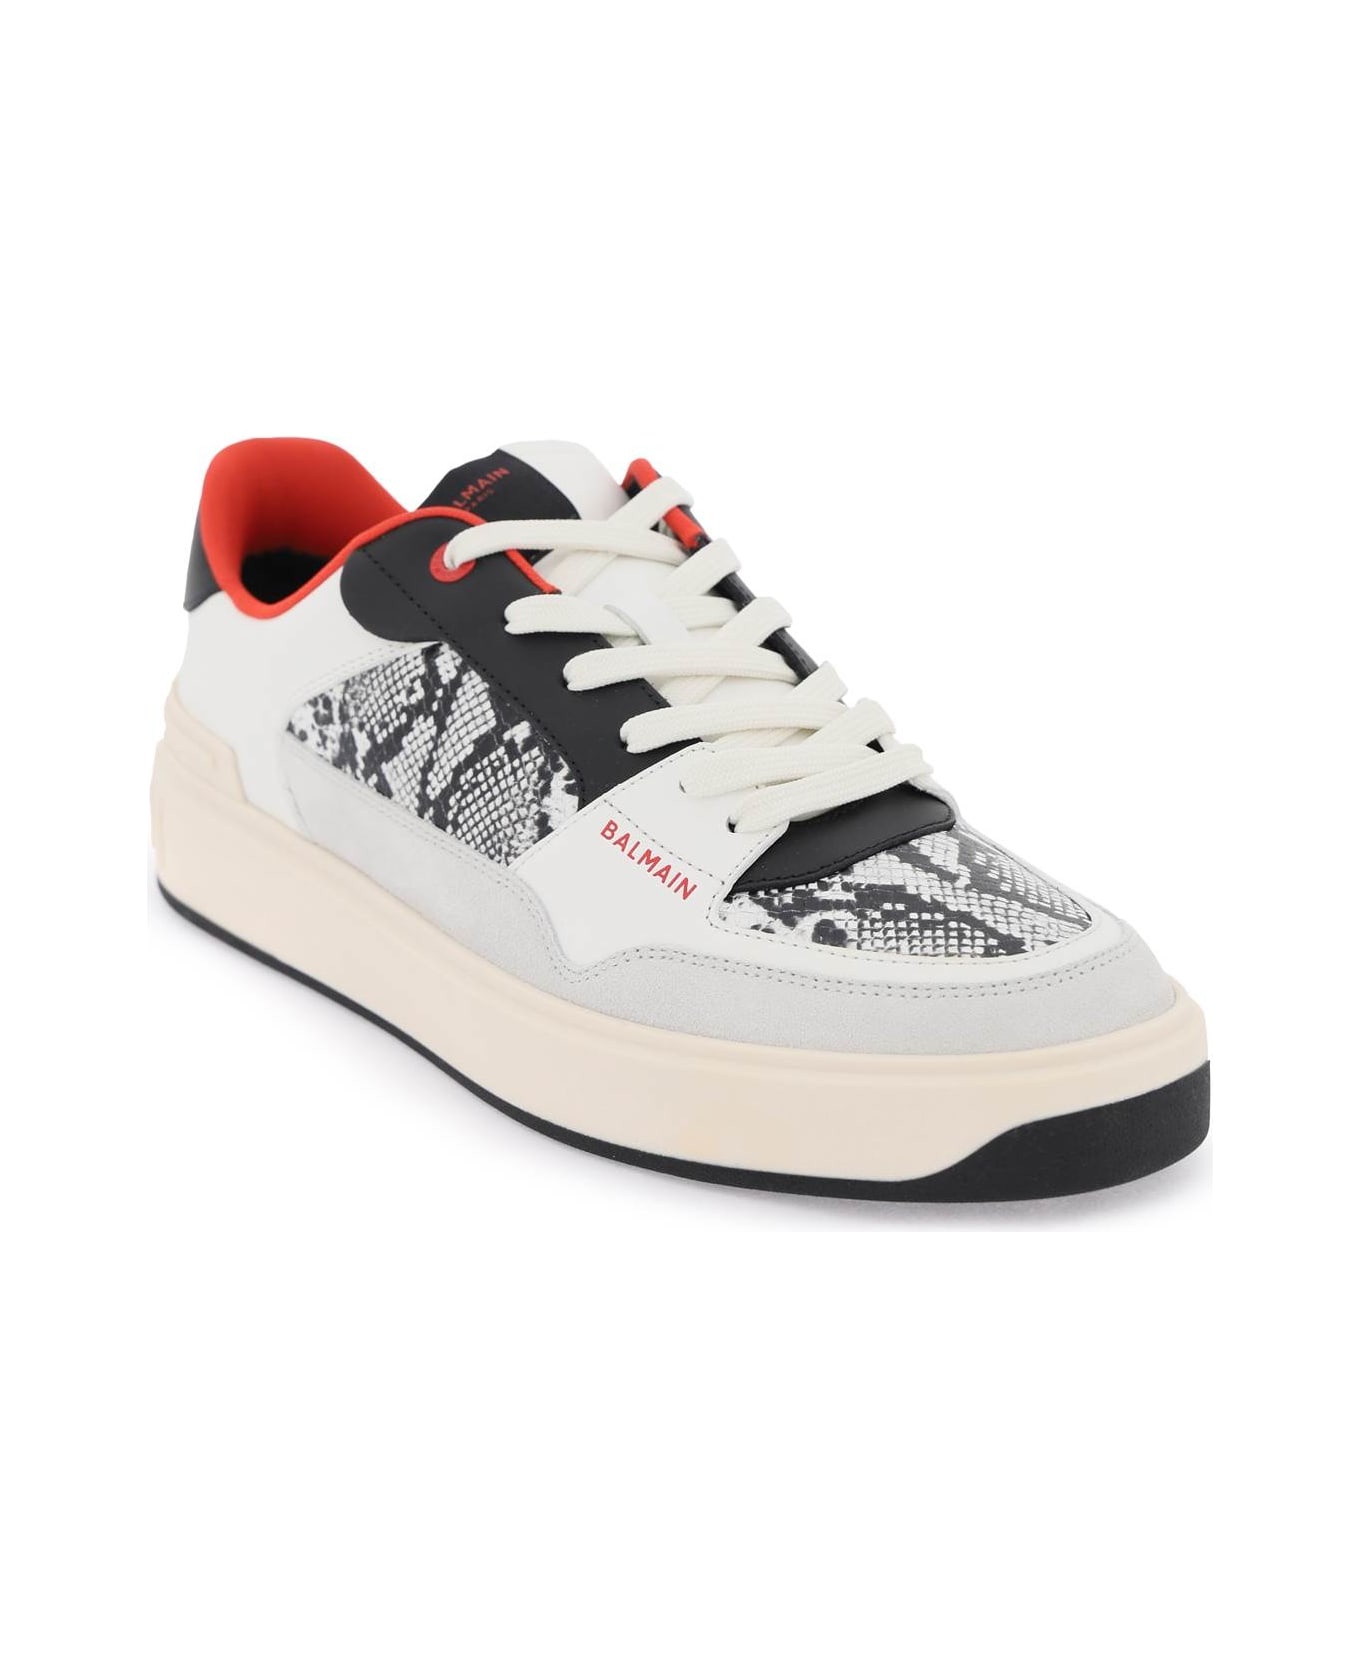 B-court Flip Sneakers In Python-effect Leather - 4